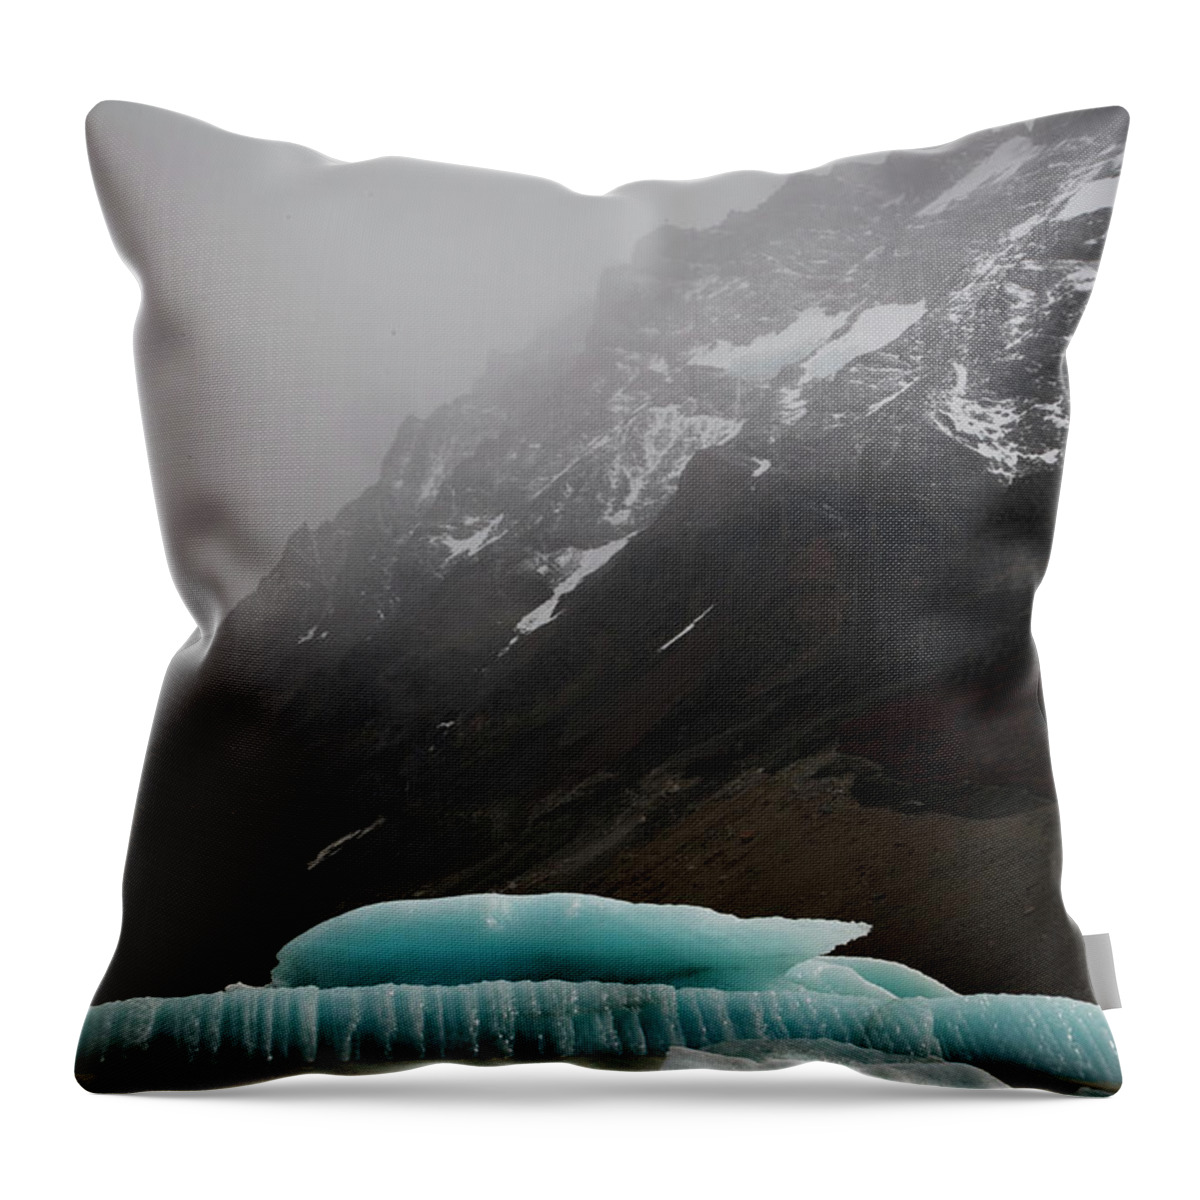 Landscape Throw Pillow featuring the photograph Laguna Torre by Ryan Weddle